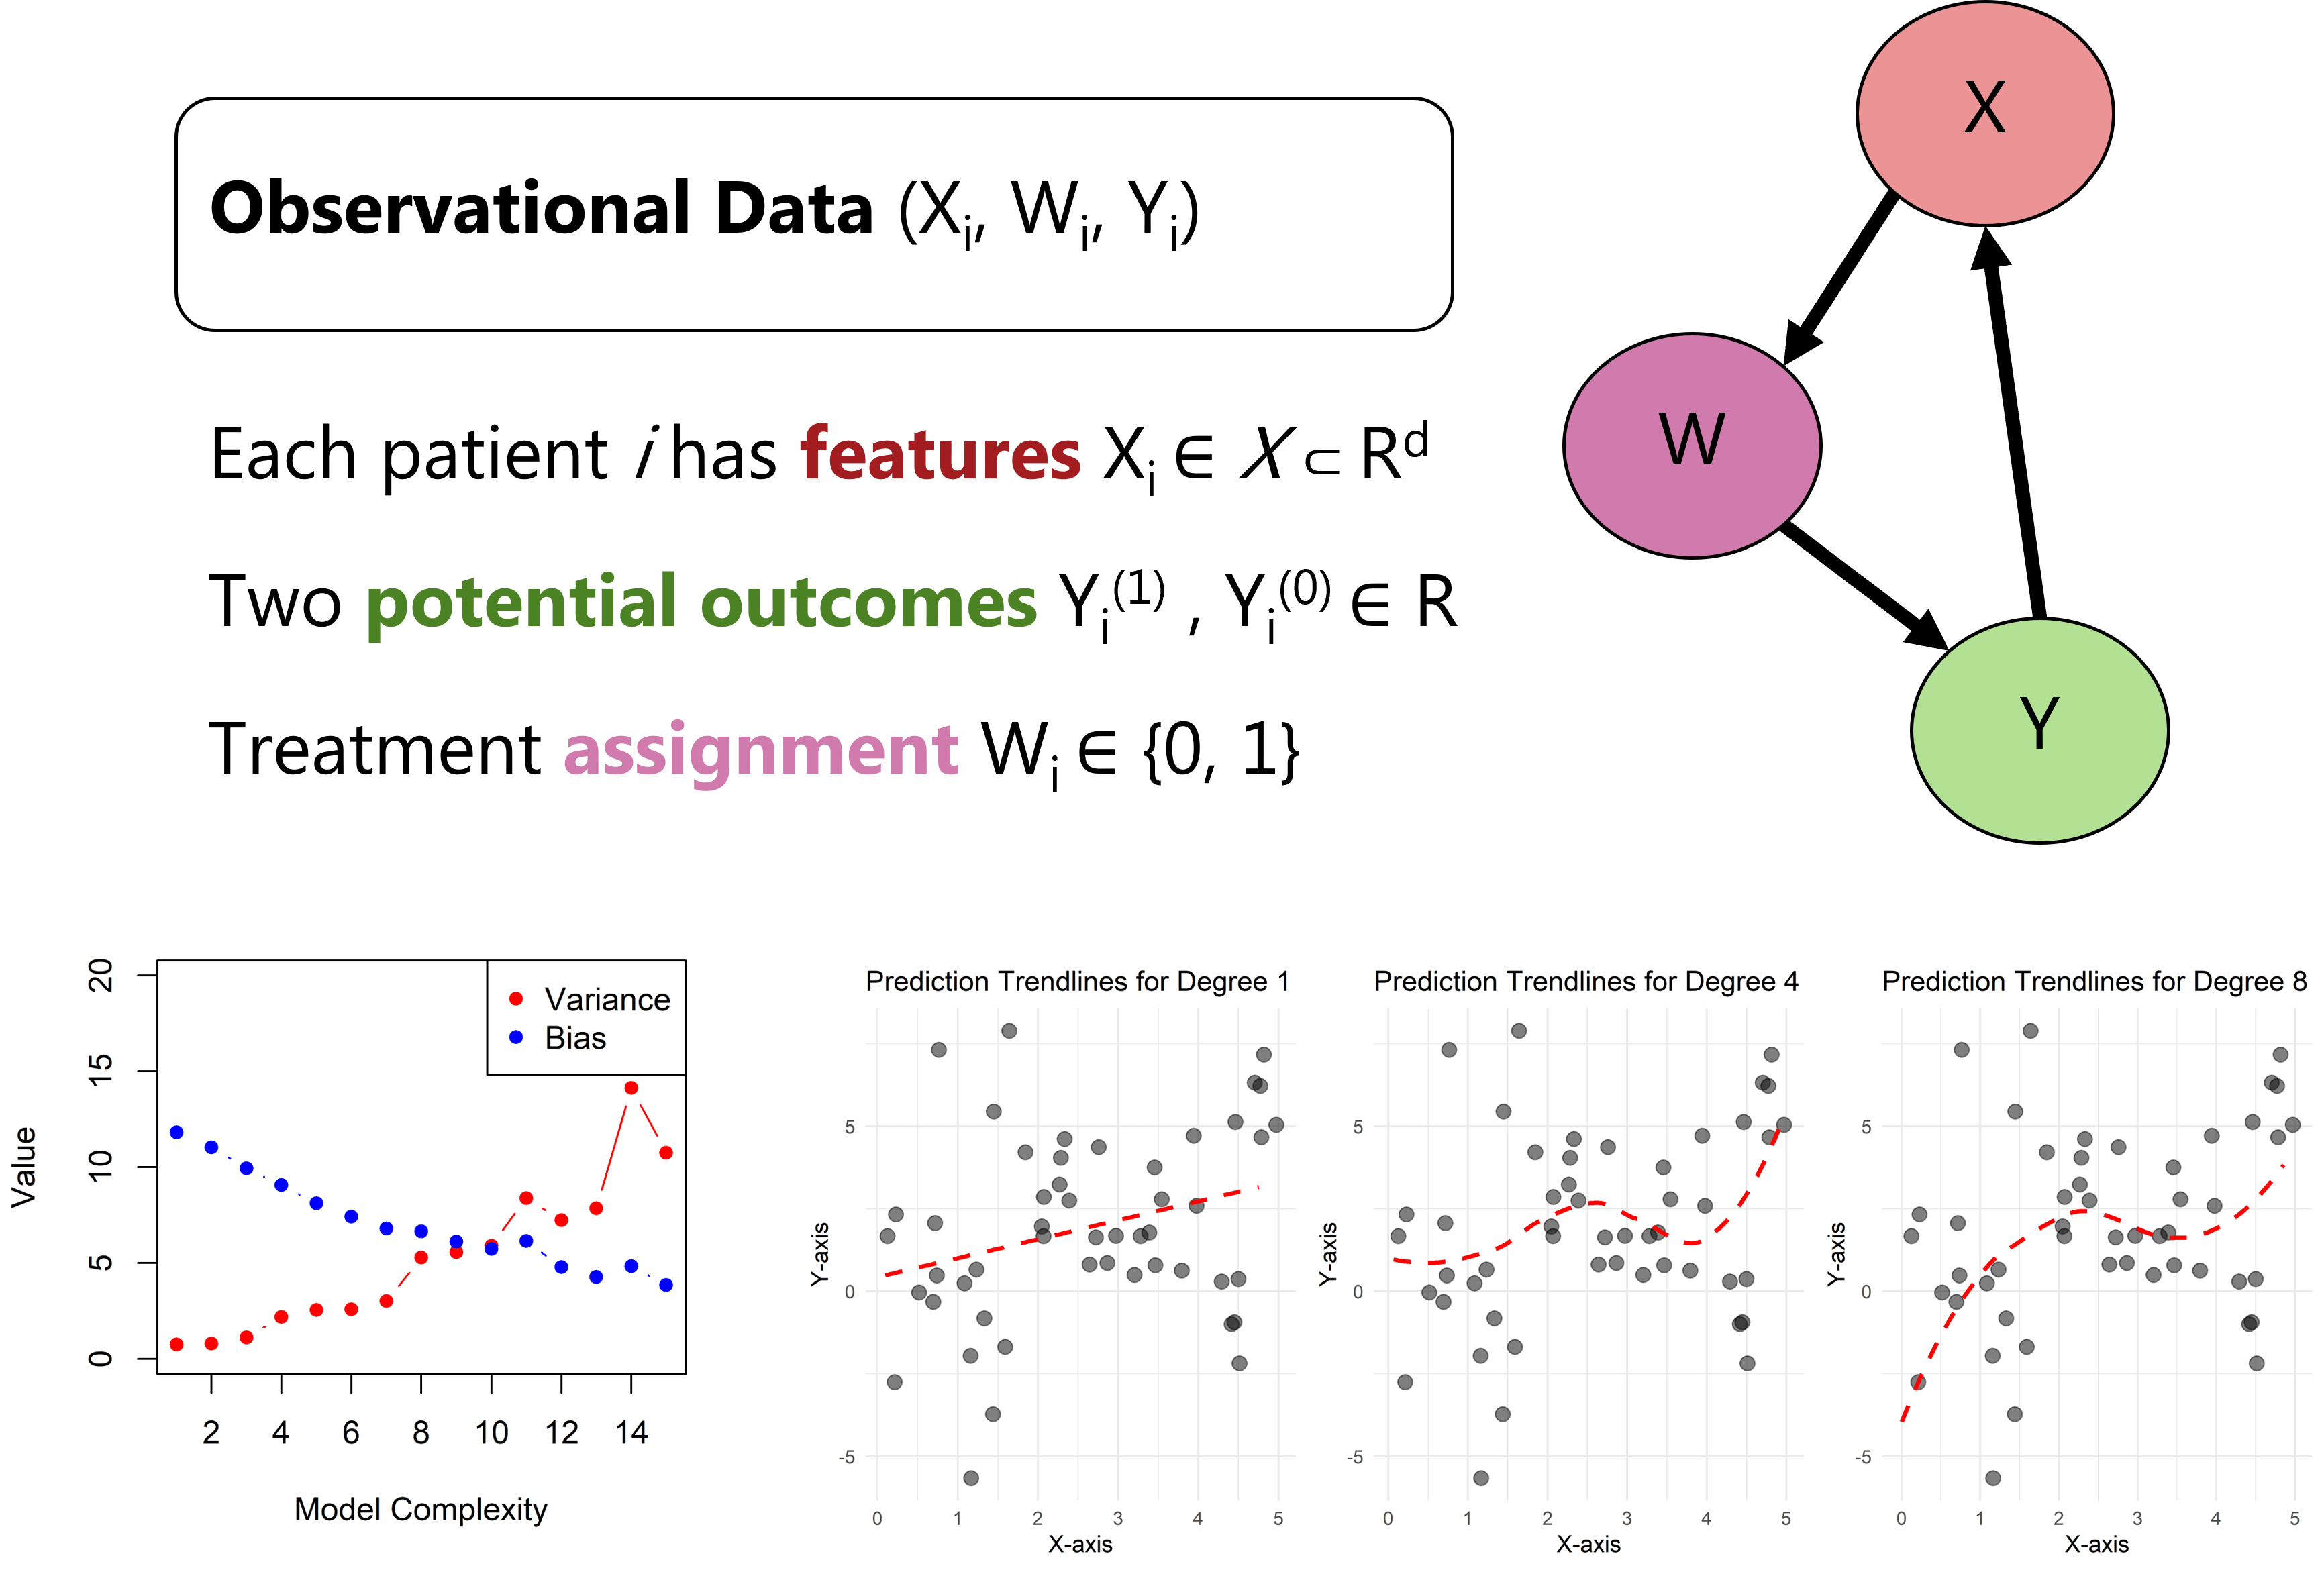 Figure explaining the causal machine learning implementations in observation data.